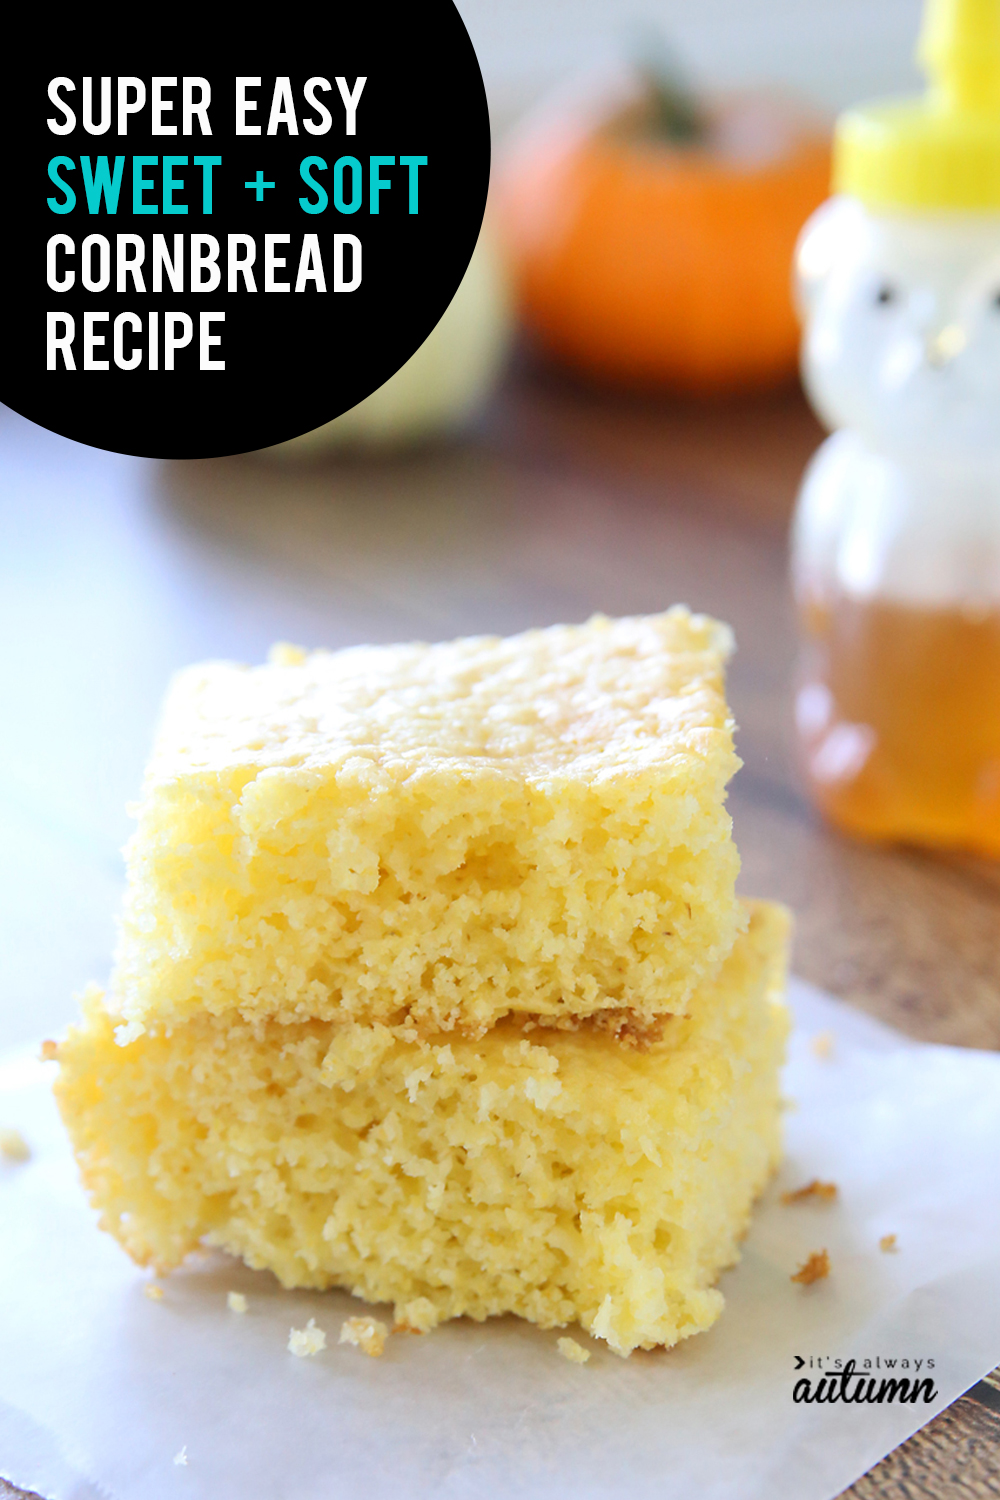 You've got to try this Jiffy cornbread mix hack for sweet, soft cornbread! Easy Jiffy cornbread recipe.